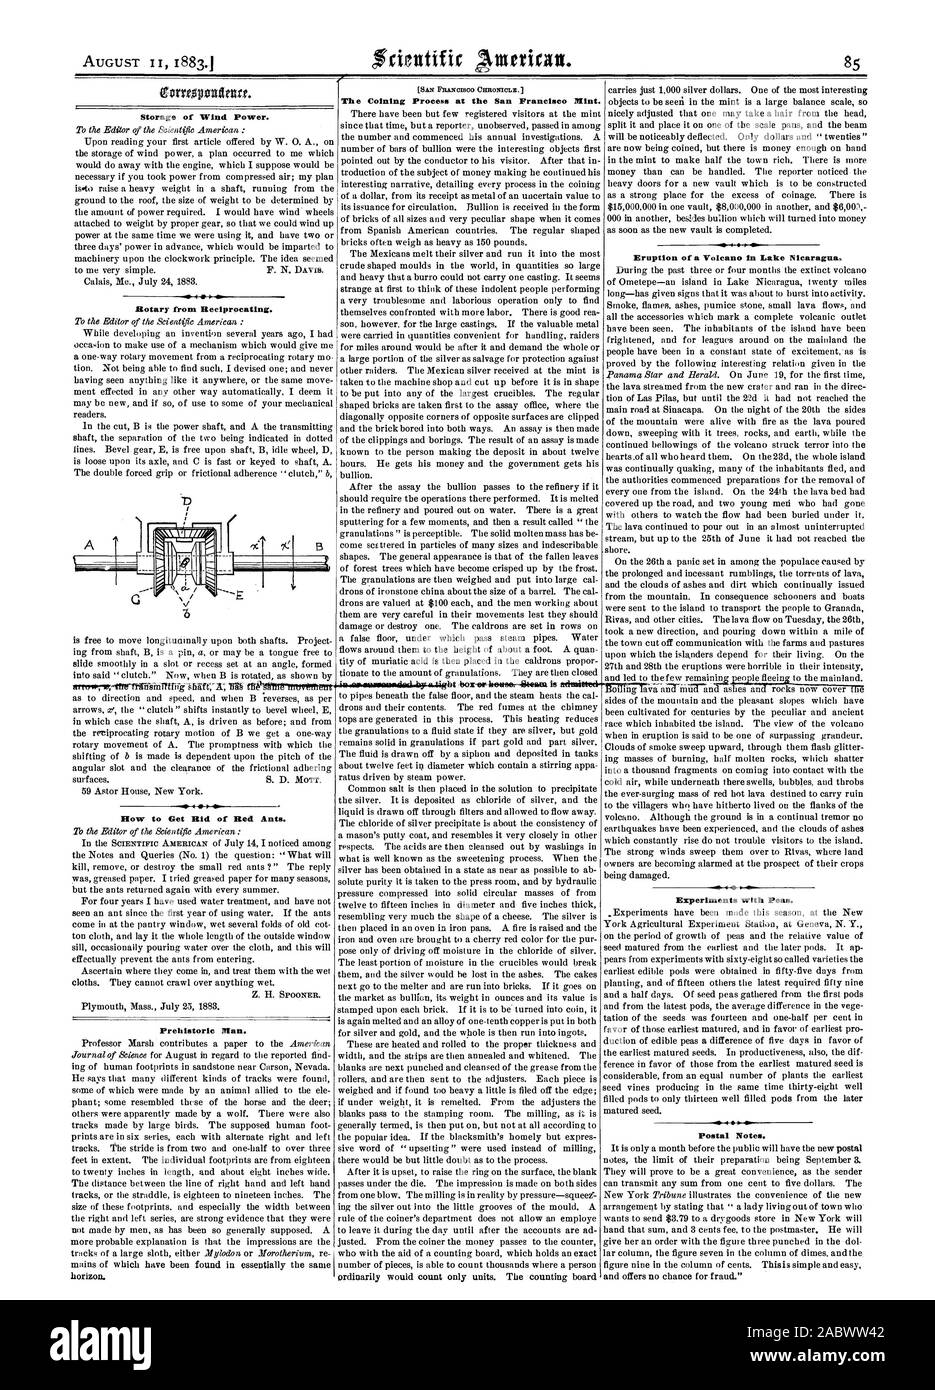 AUGUST II I883. I Storage of Wind Power. Rotary from Reciprocating. How to Get Rid of Red Ants. Prehistoric Man. The Coining Process at the San Francisco Mint. Eruption of a Volcano in Lake Nicaragua Experiments with Peas. Postal Notes., scientific american, 1883-08-11 Stock Photo